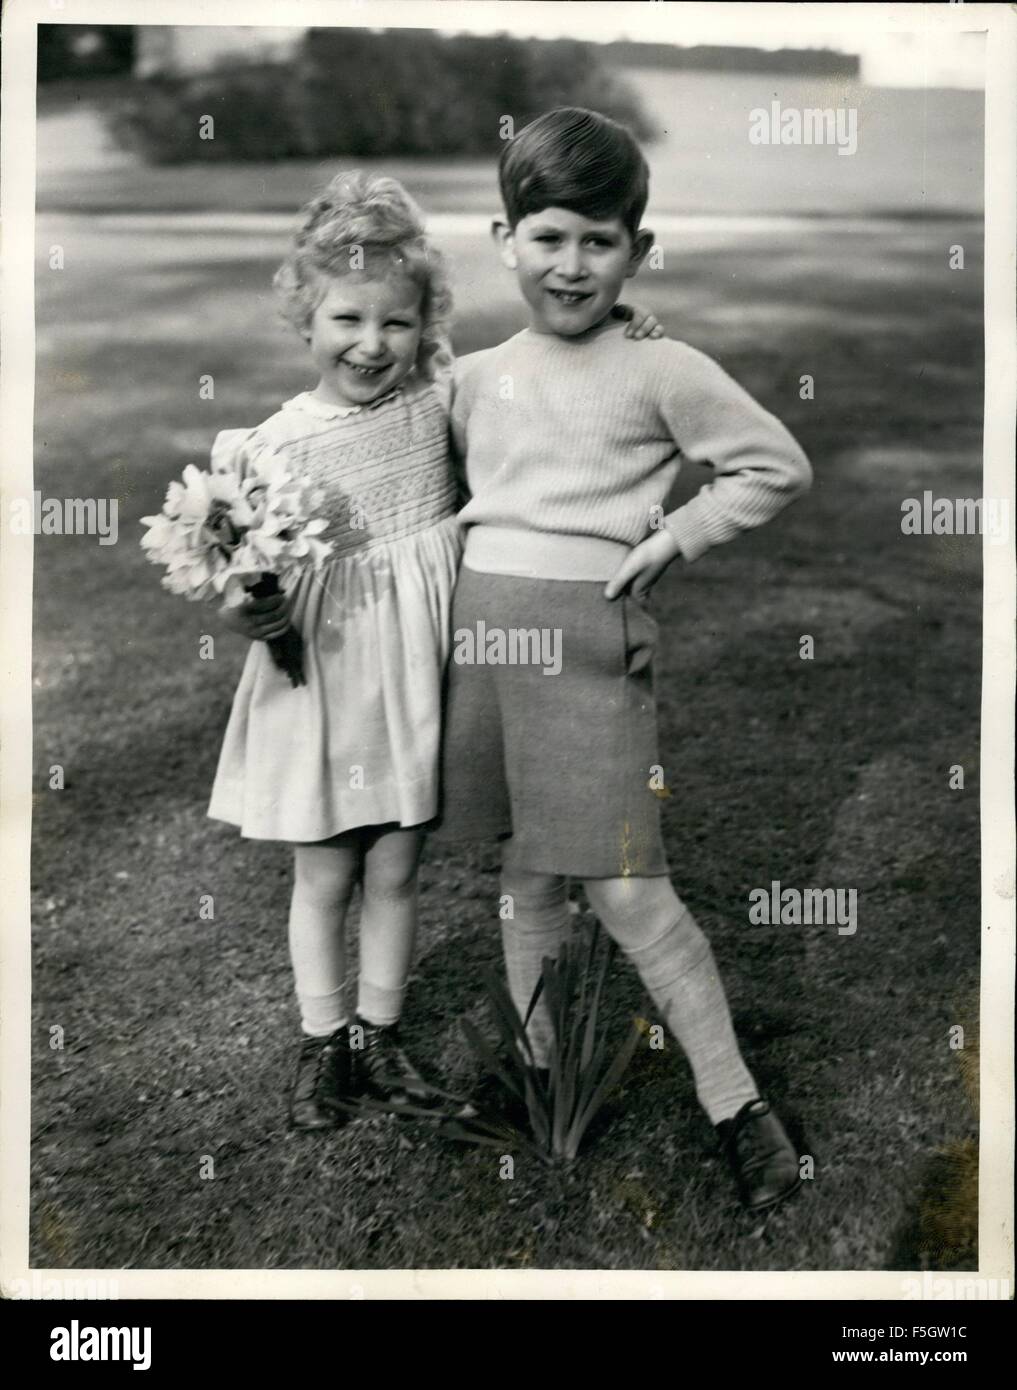 1945 - New Photographs of H.M. Queen Elizabeth, the Queen mother, Prince Charles and Princess Anne have been released for General Publication on Friday April 23rd. Photo Shows Prince Charles and Princess Anne in the Garden of Royal Lodge, Windsor. © Keystone Pictures USA/ZUMAPRESS.com/Alamy Live News Stock Photo